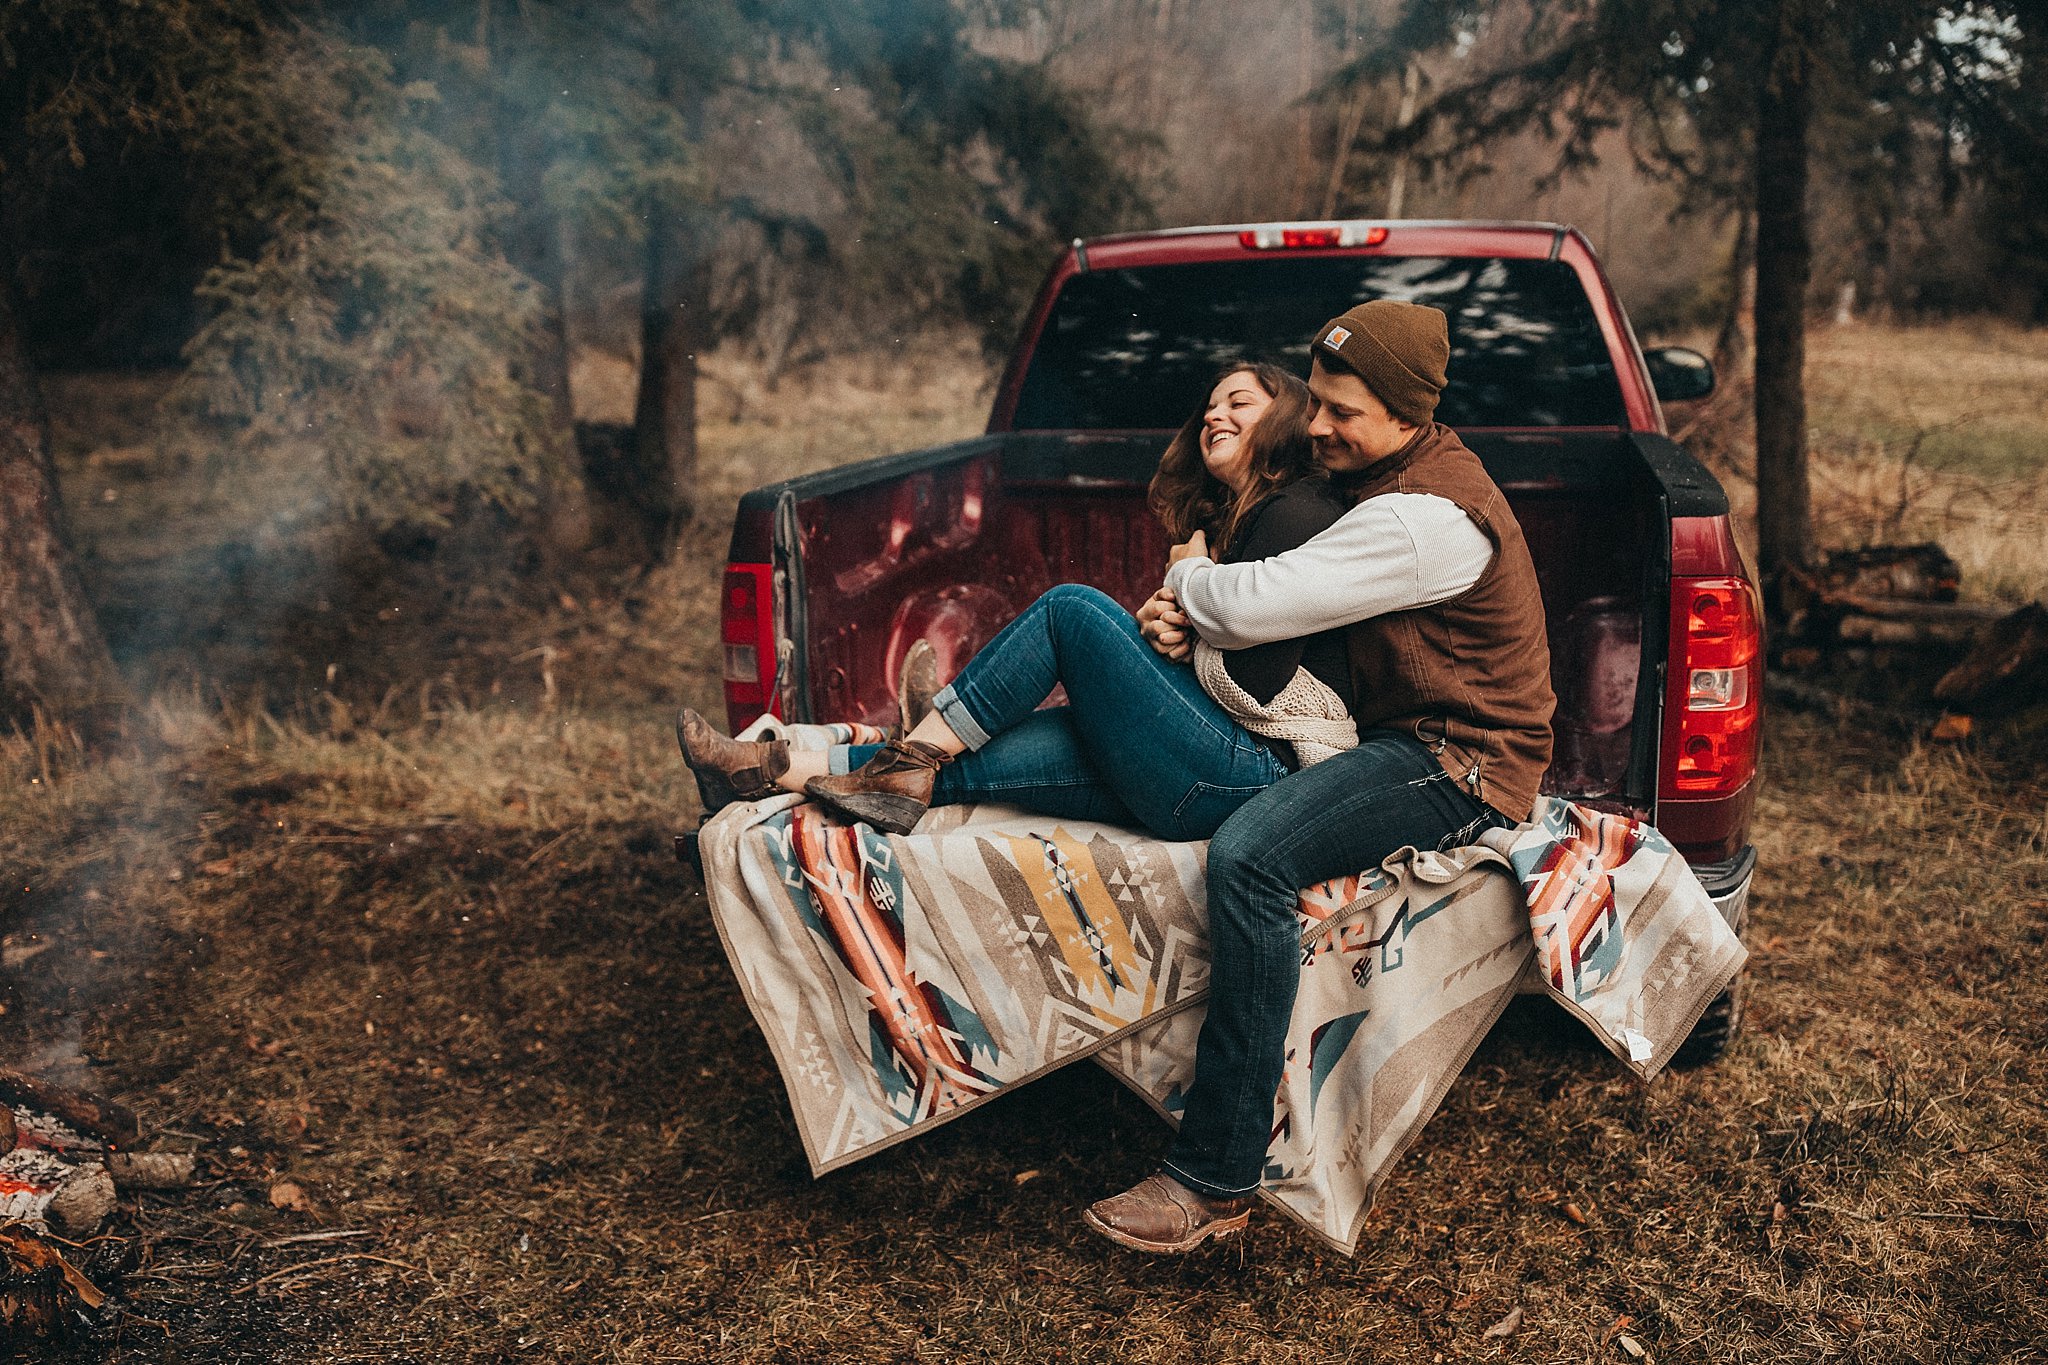 Couple photo ideas in a truck